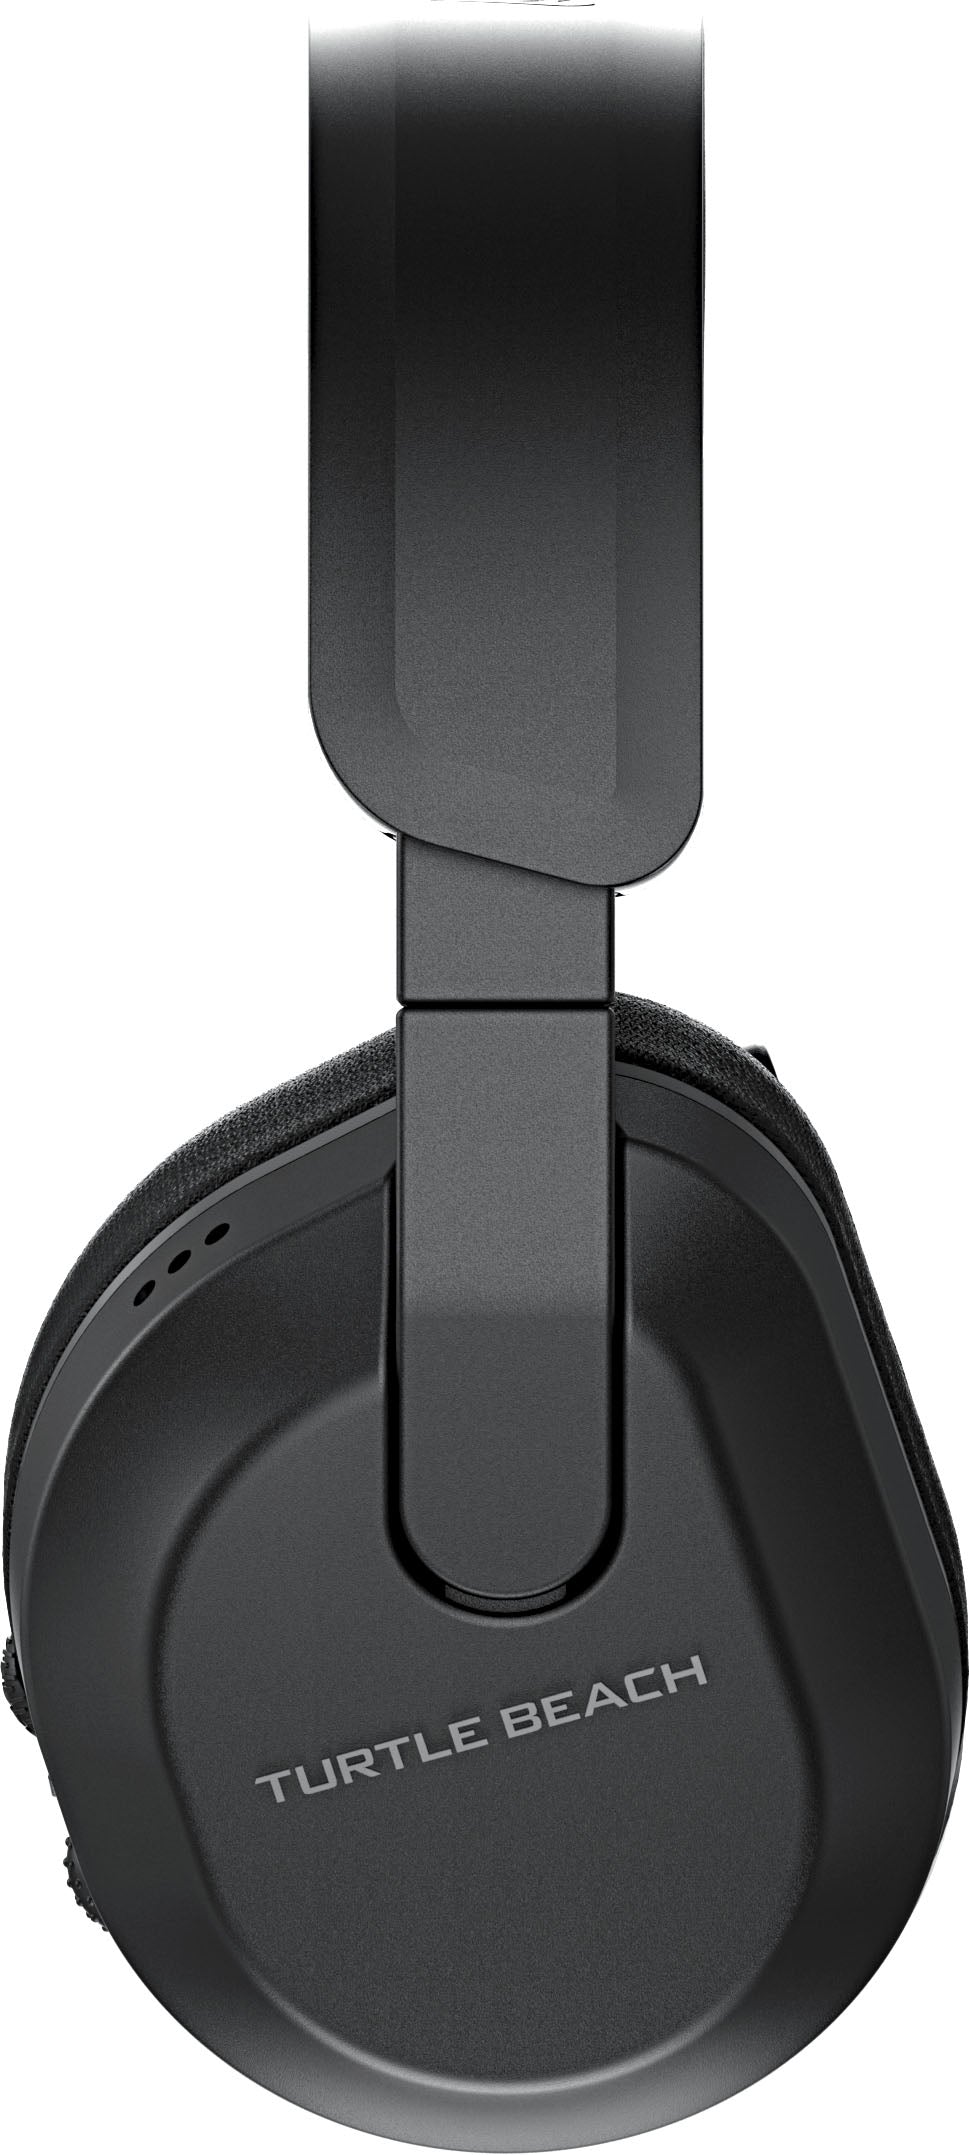 Turtle Beach Stealth 600 Wireless Gaming Headset for PlayStation, PS5, PS4, Nintendo Switch, PC with 80-Hr Battery - Black_4